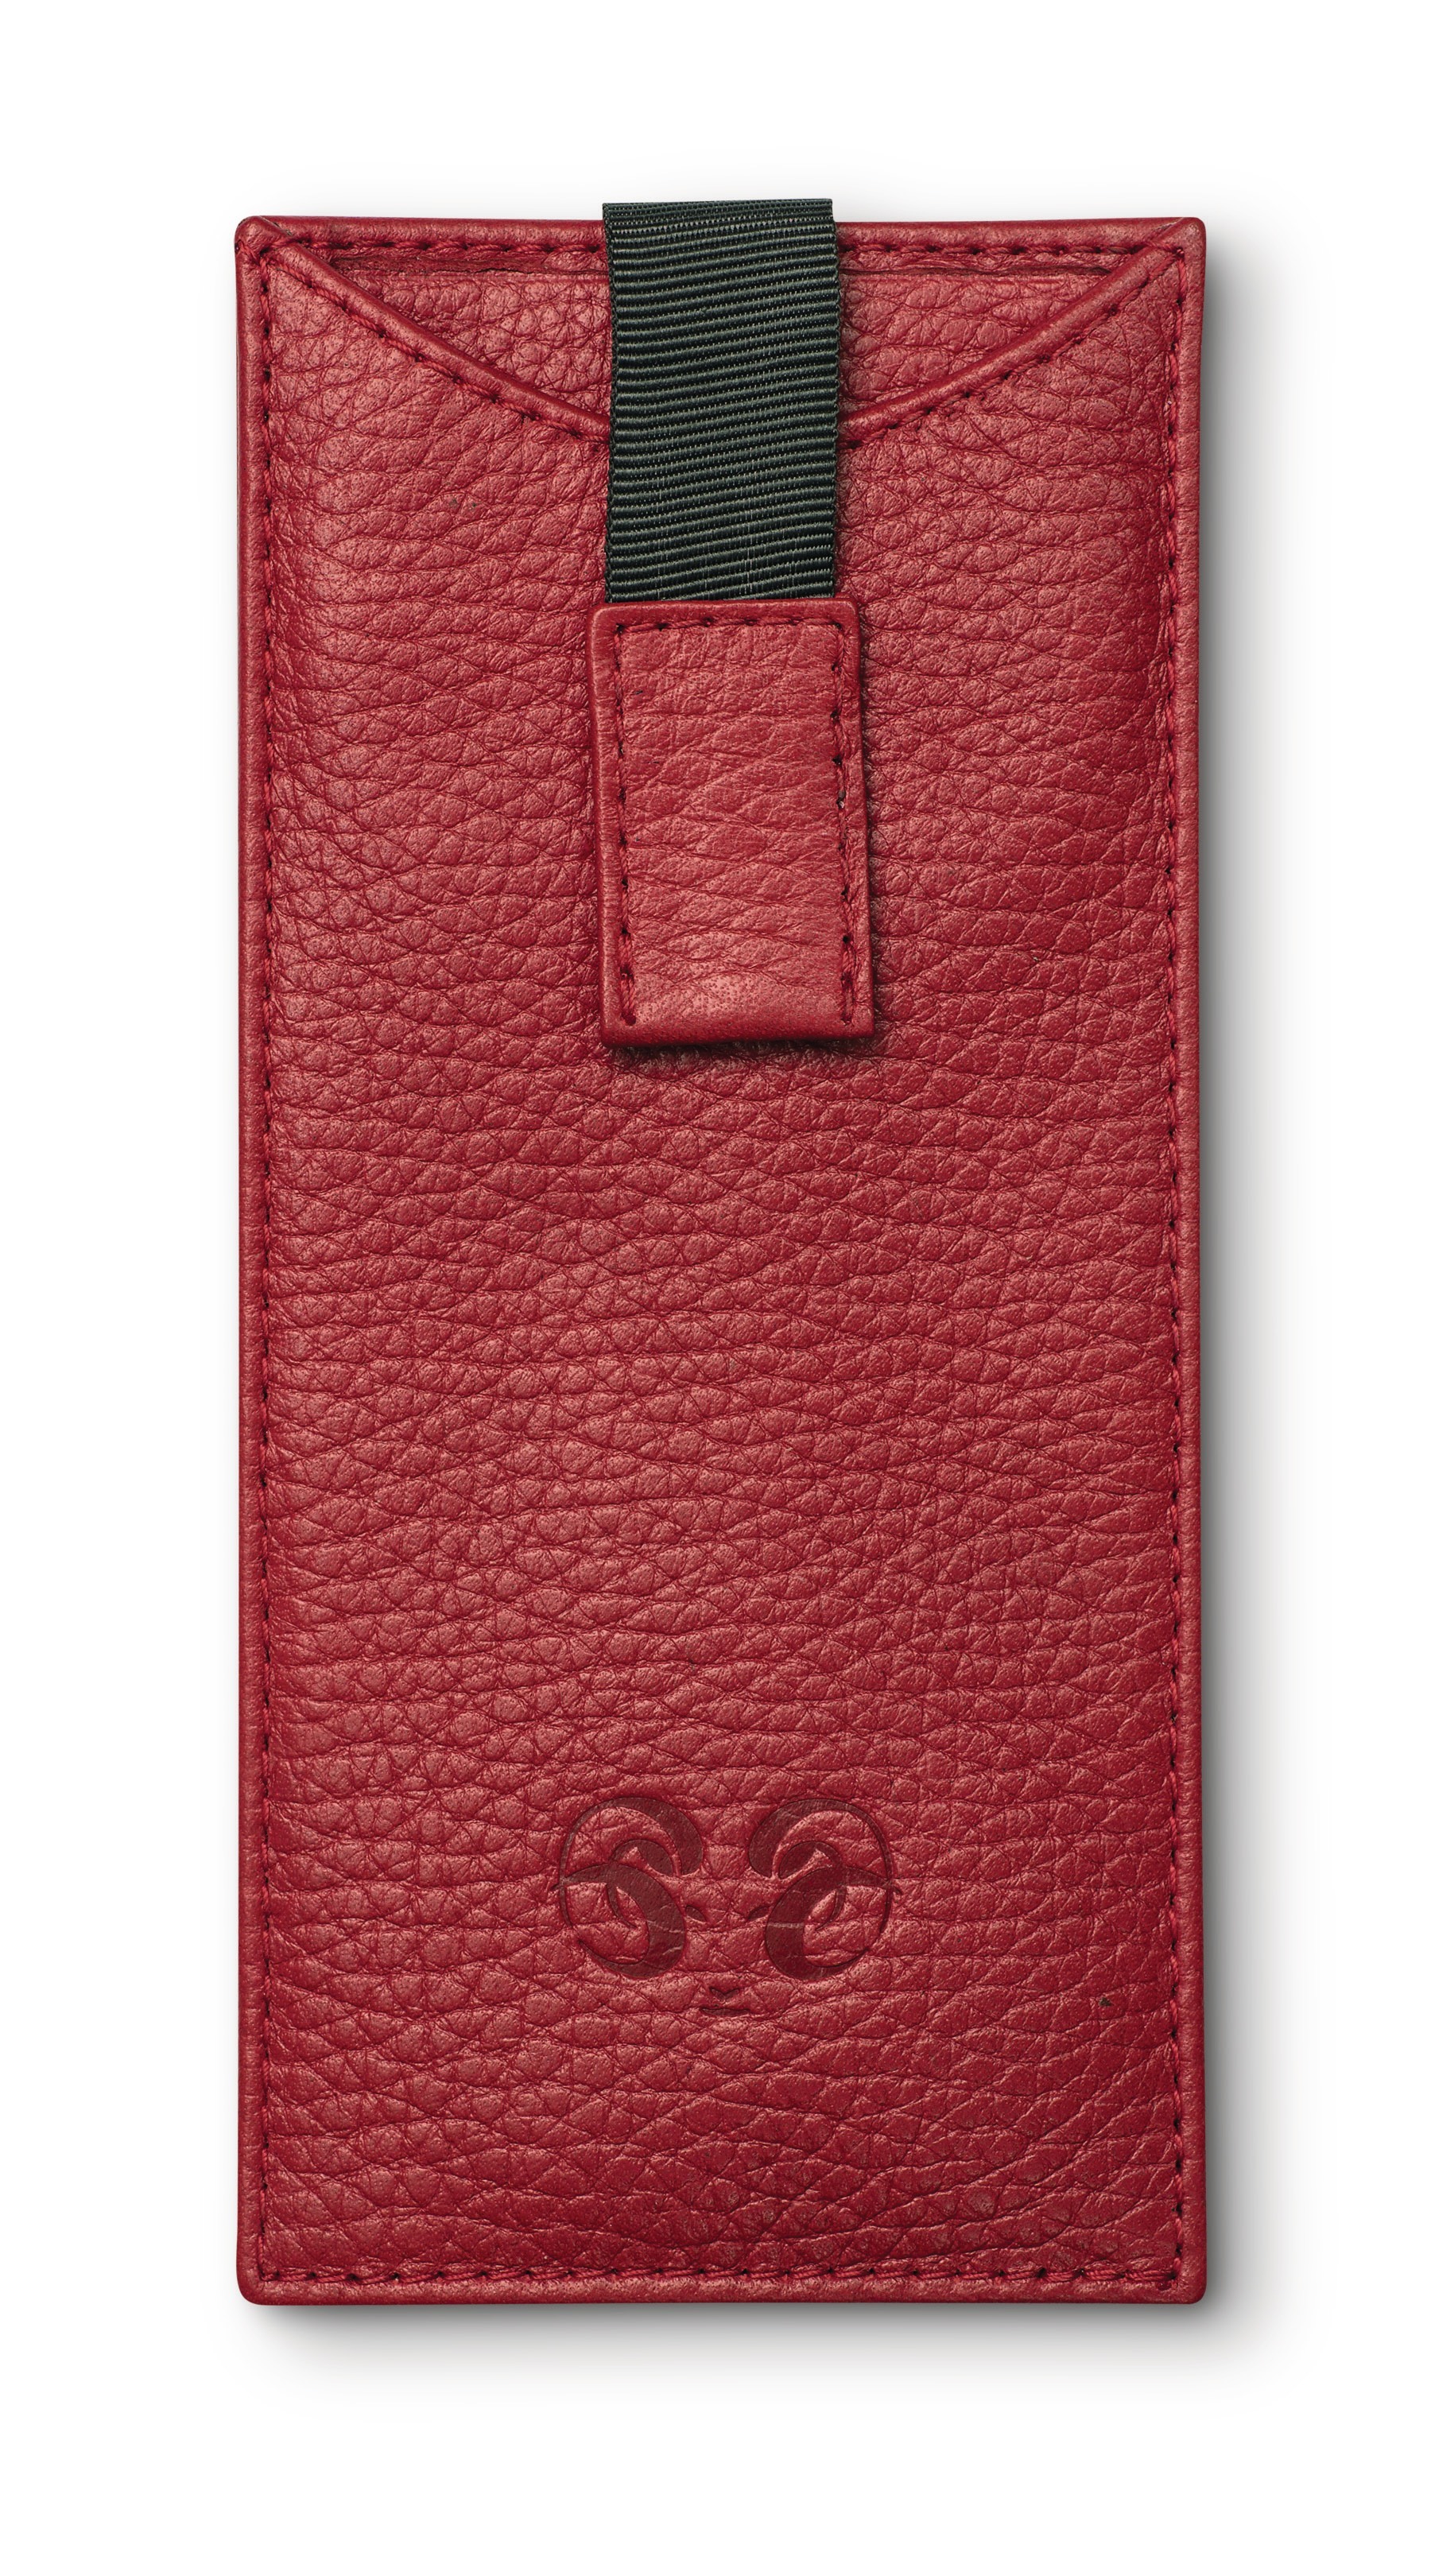 Davidoff Year of the Sheep scissors pouch